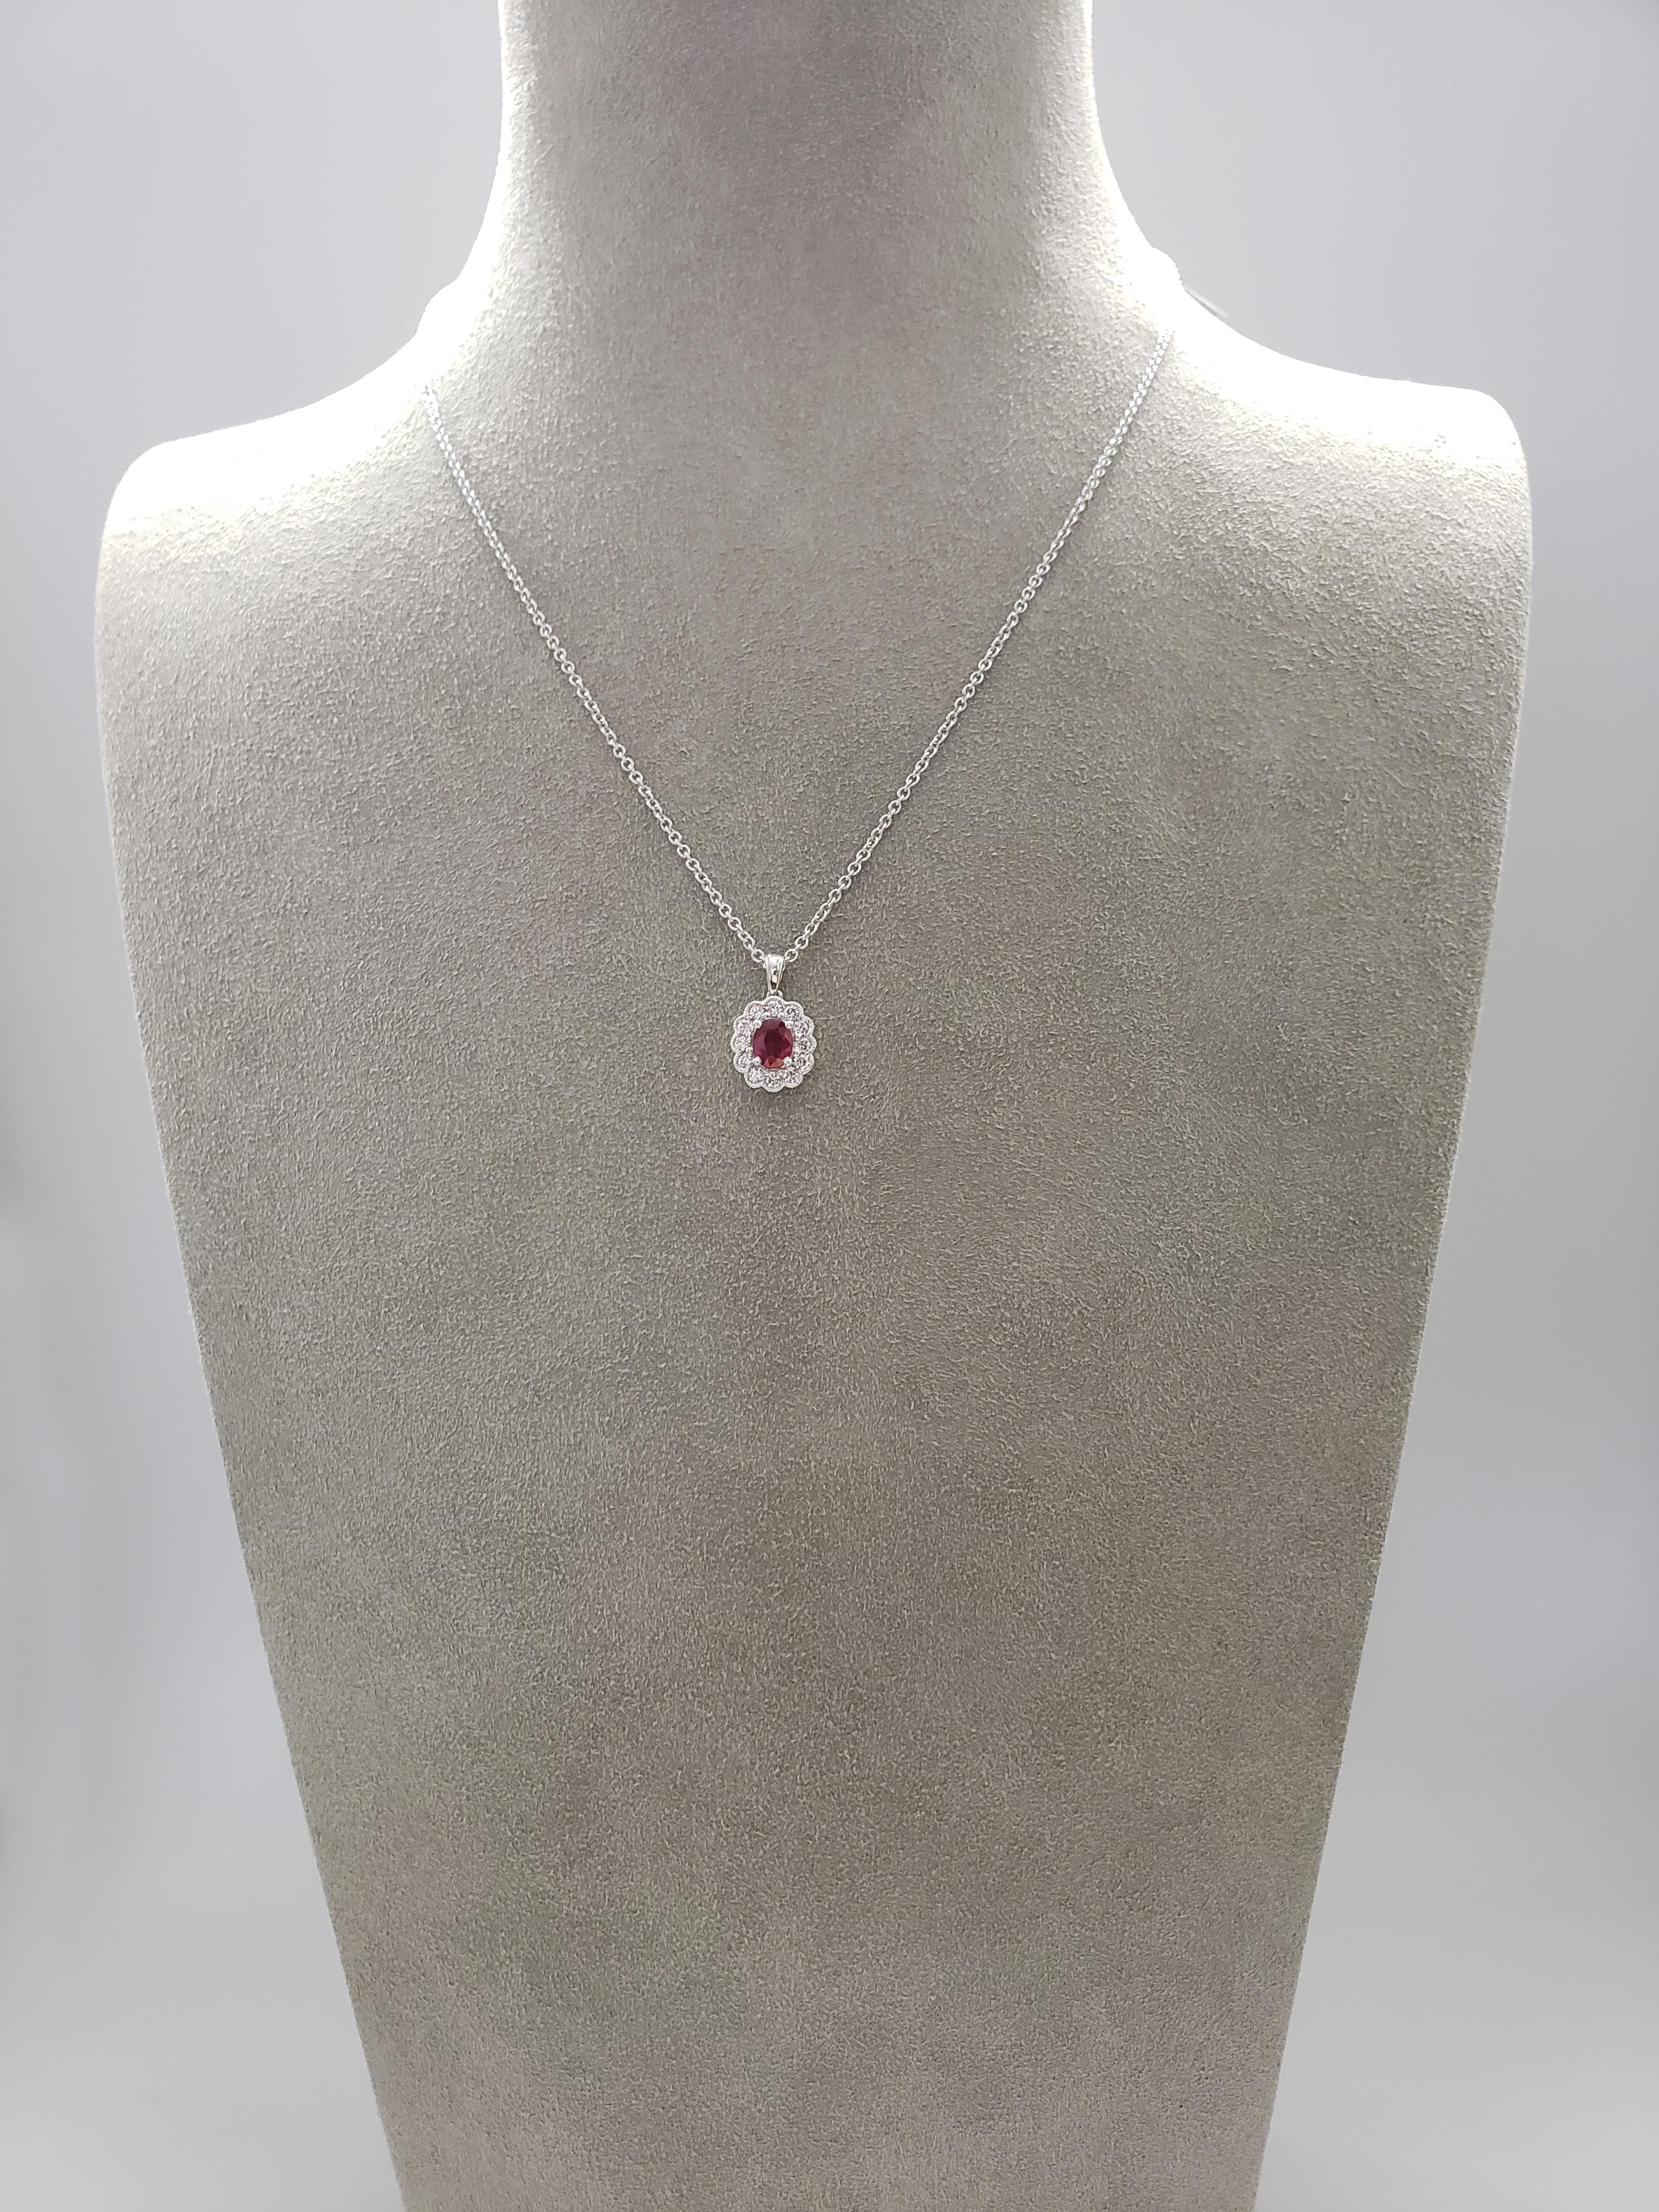 Roman Malakov 0.65 Carat Oval Cut Ruby with Diamond Halo Pendant Necklace In New Condition For Sale In New York, NY